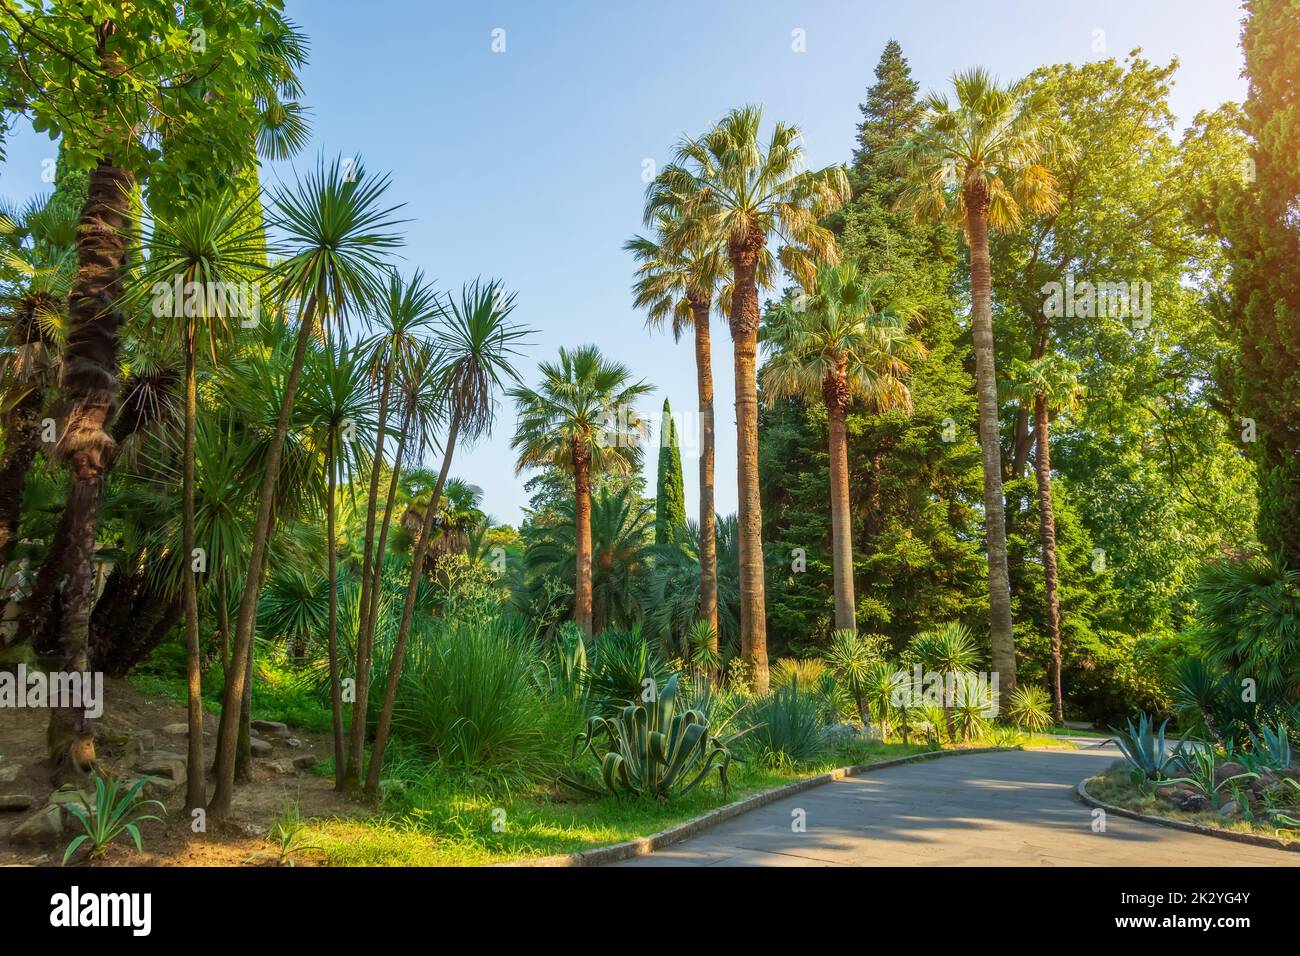 Growing palm trees in a subtropical park with different vegetation Stock Photo